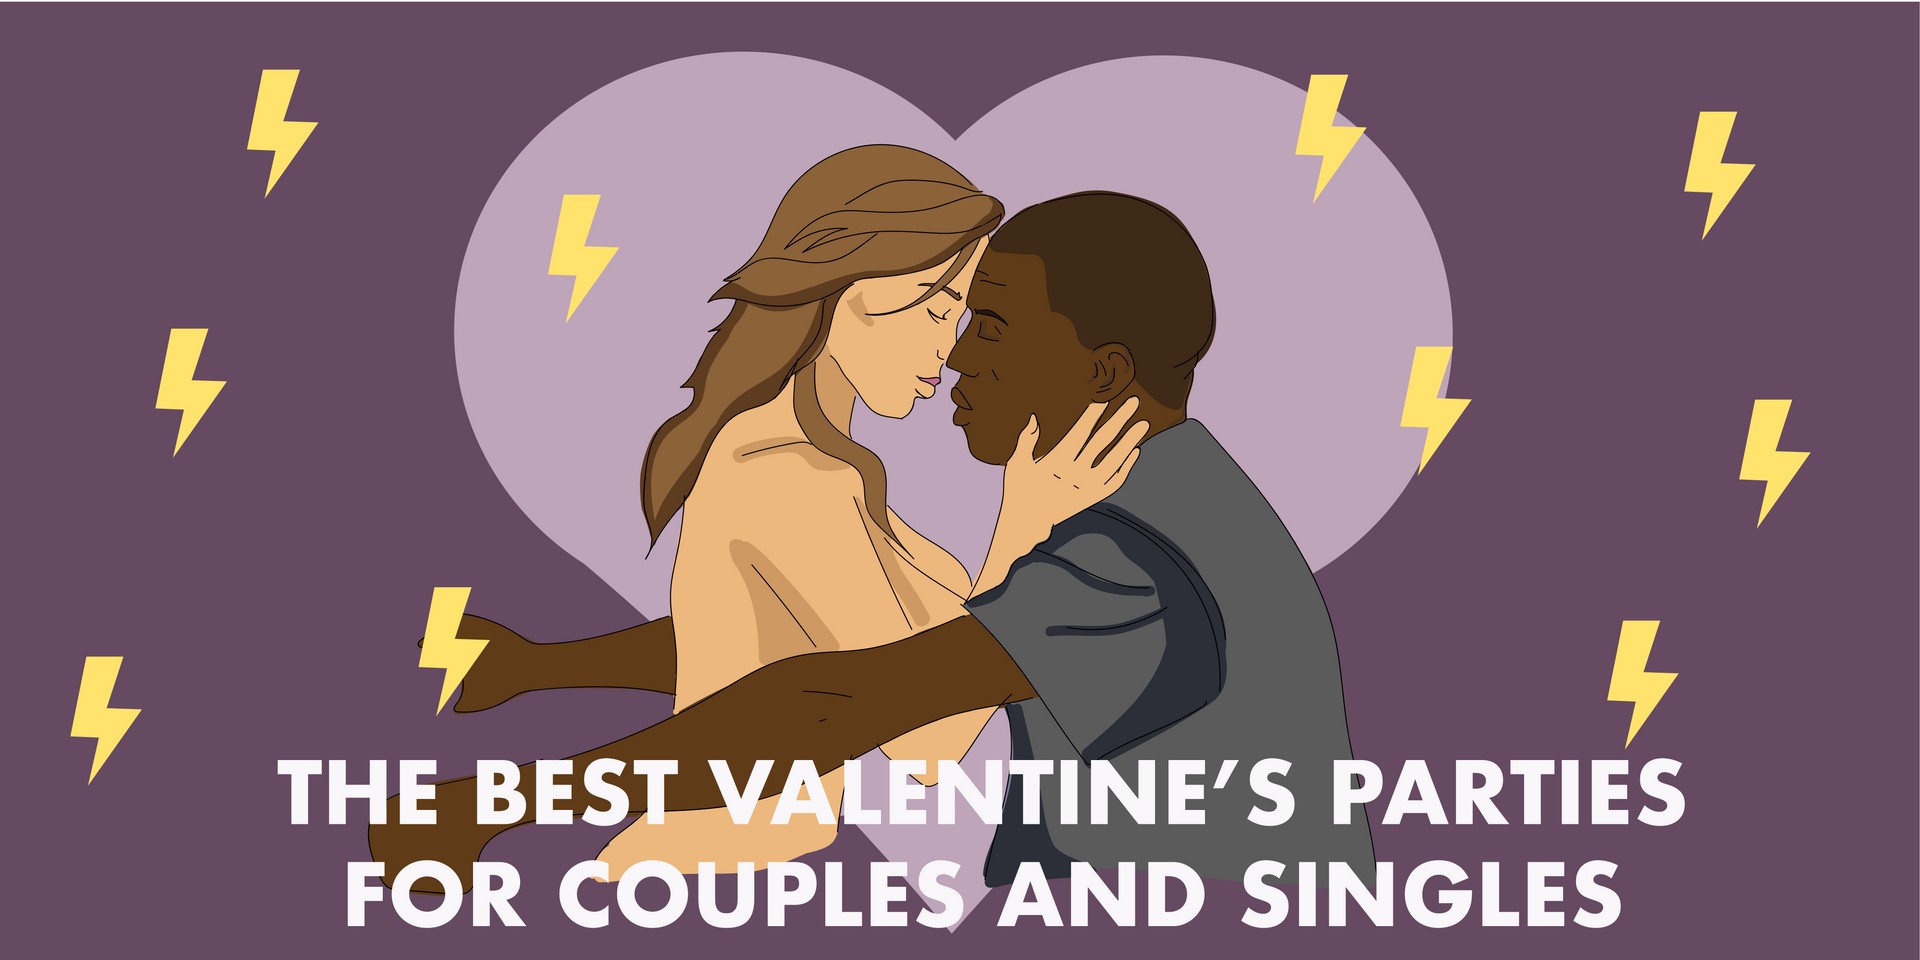 The best Valentine's Day parties for couples and singles